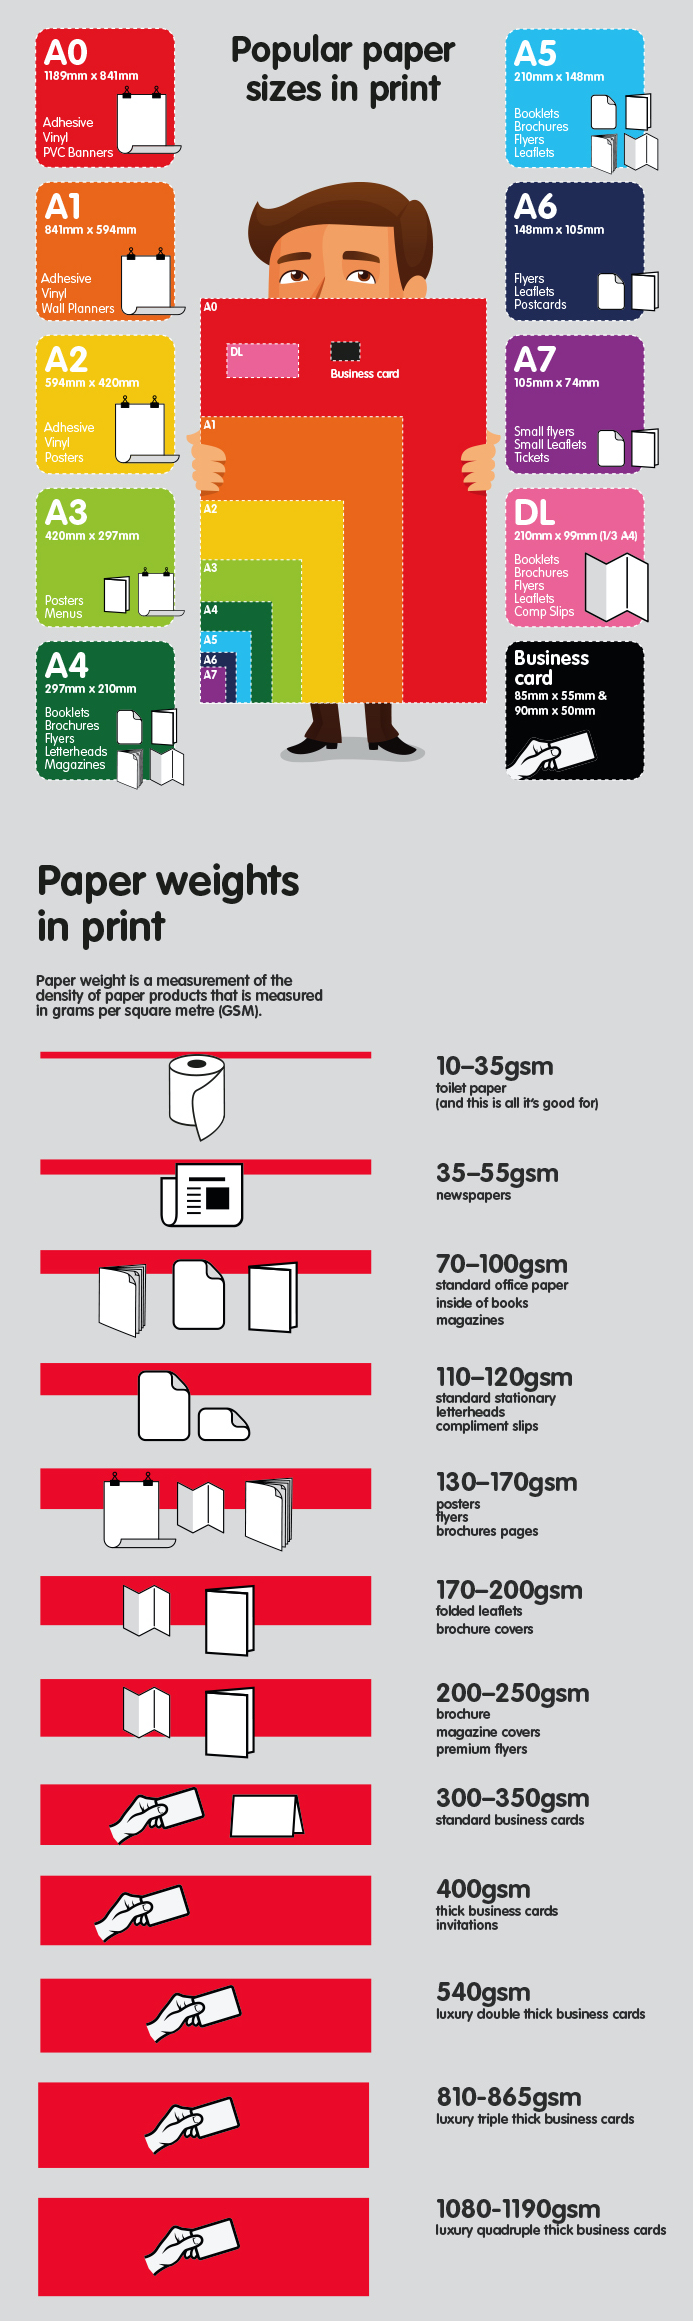 Infographic Paper Weight Guide